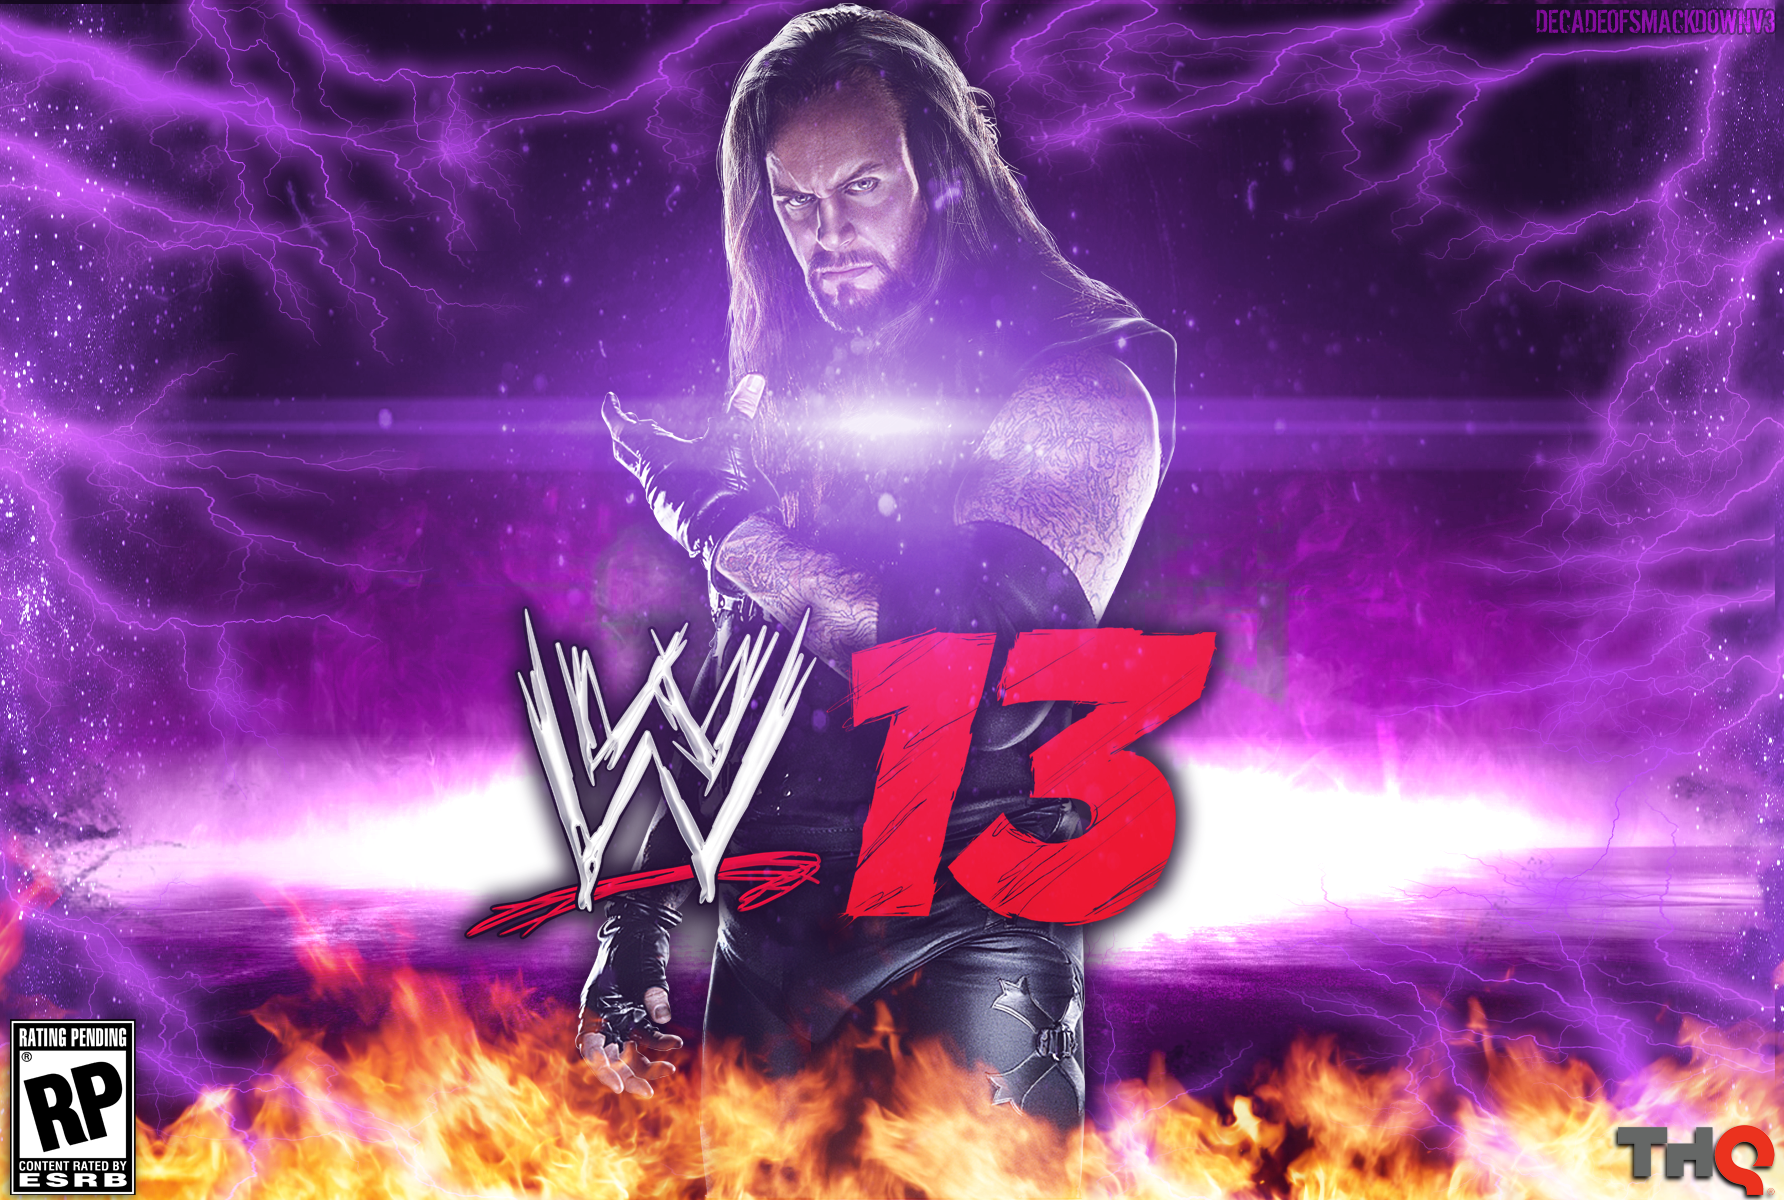 Wwe The Undertaker Wallpaper By Decadeofsmackdownv3 On